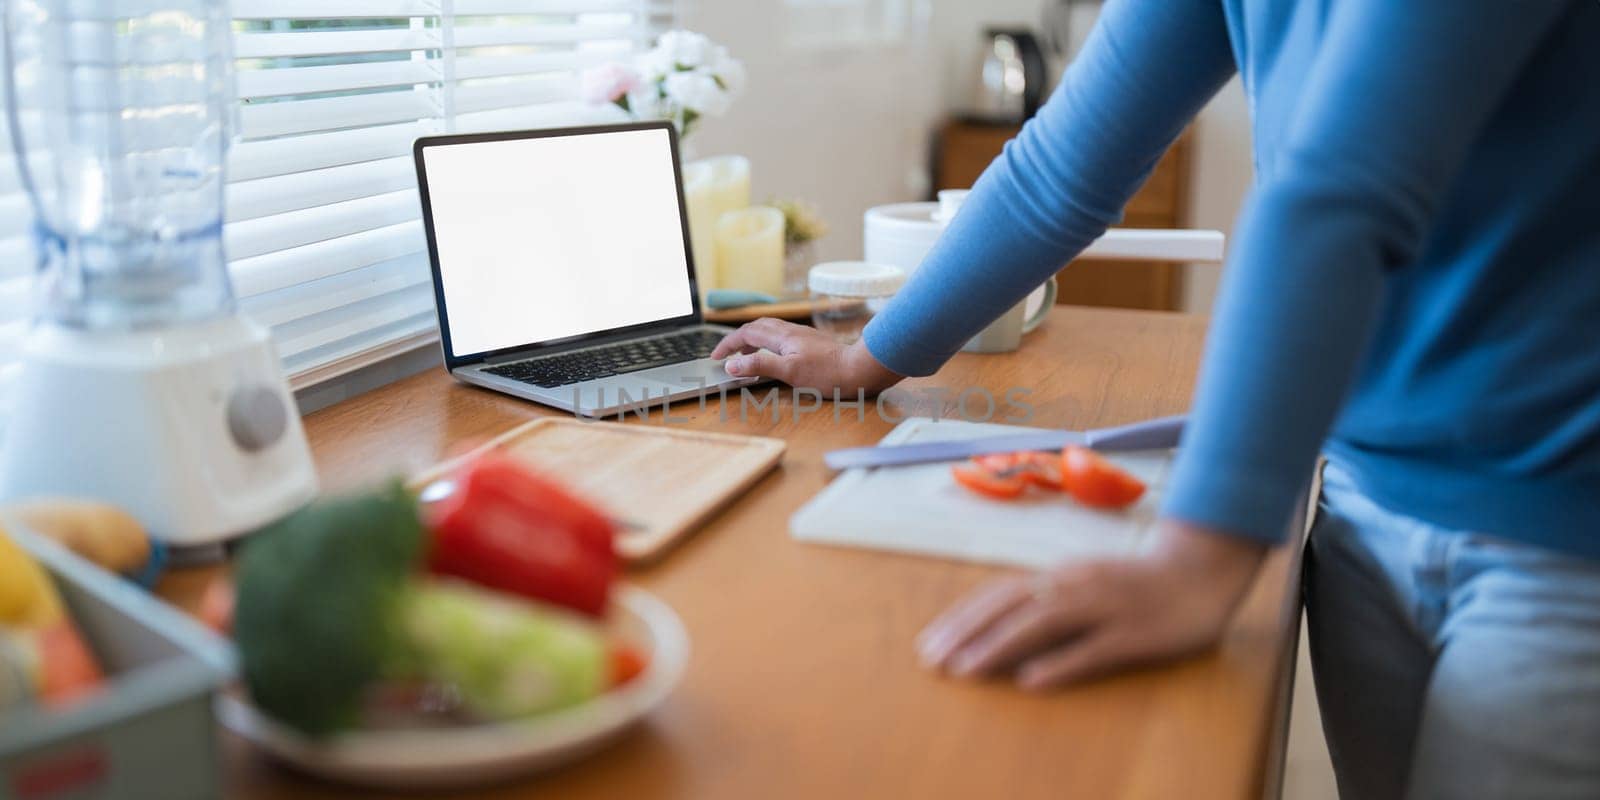 Cheerful Fat woman cooking in kitchen showing laptop mock up blank white screen in home by nateemee